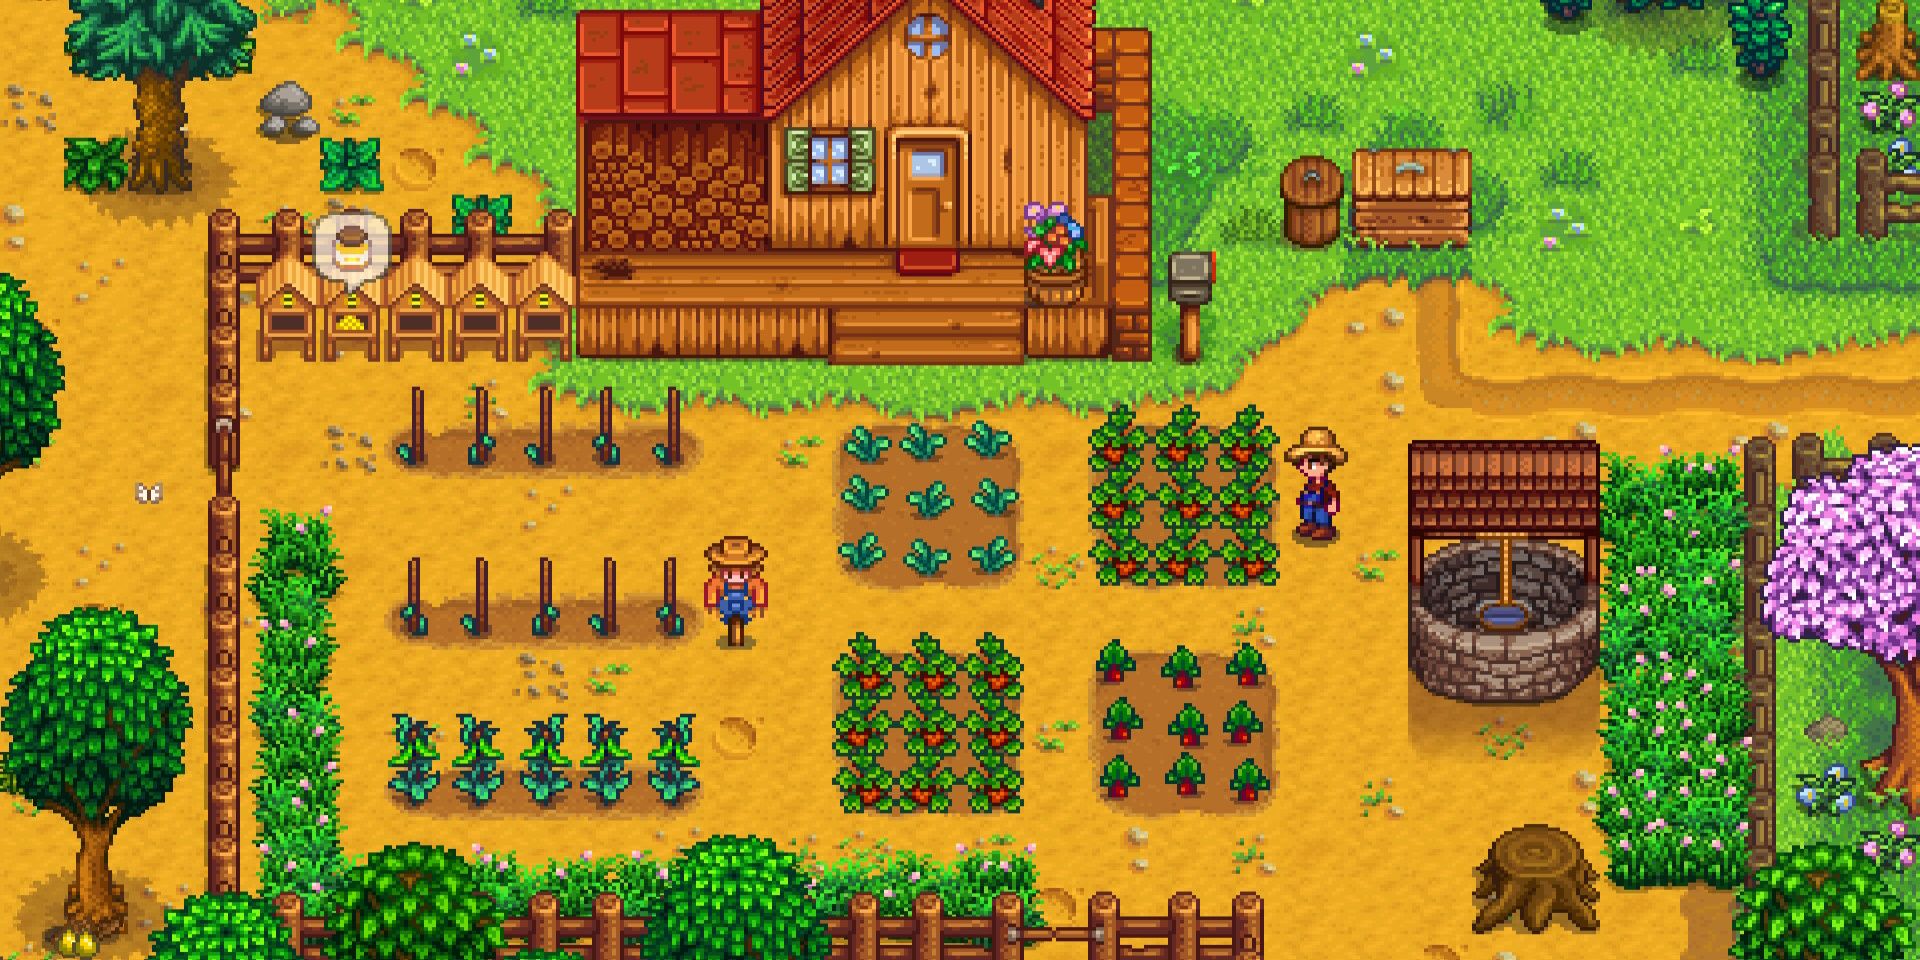 Characters inspecting crops and farms in Stardew Valley